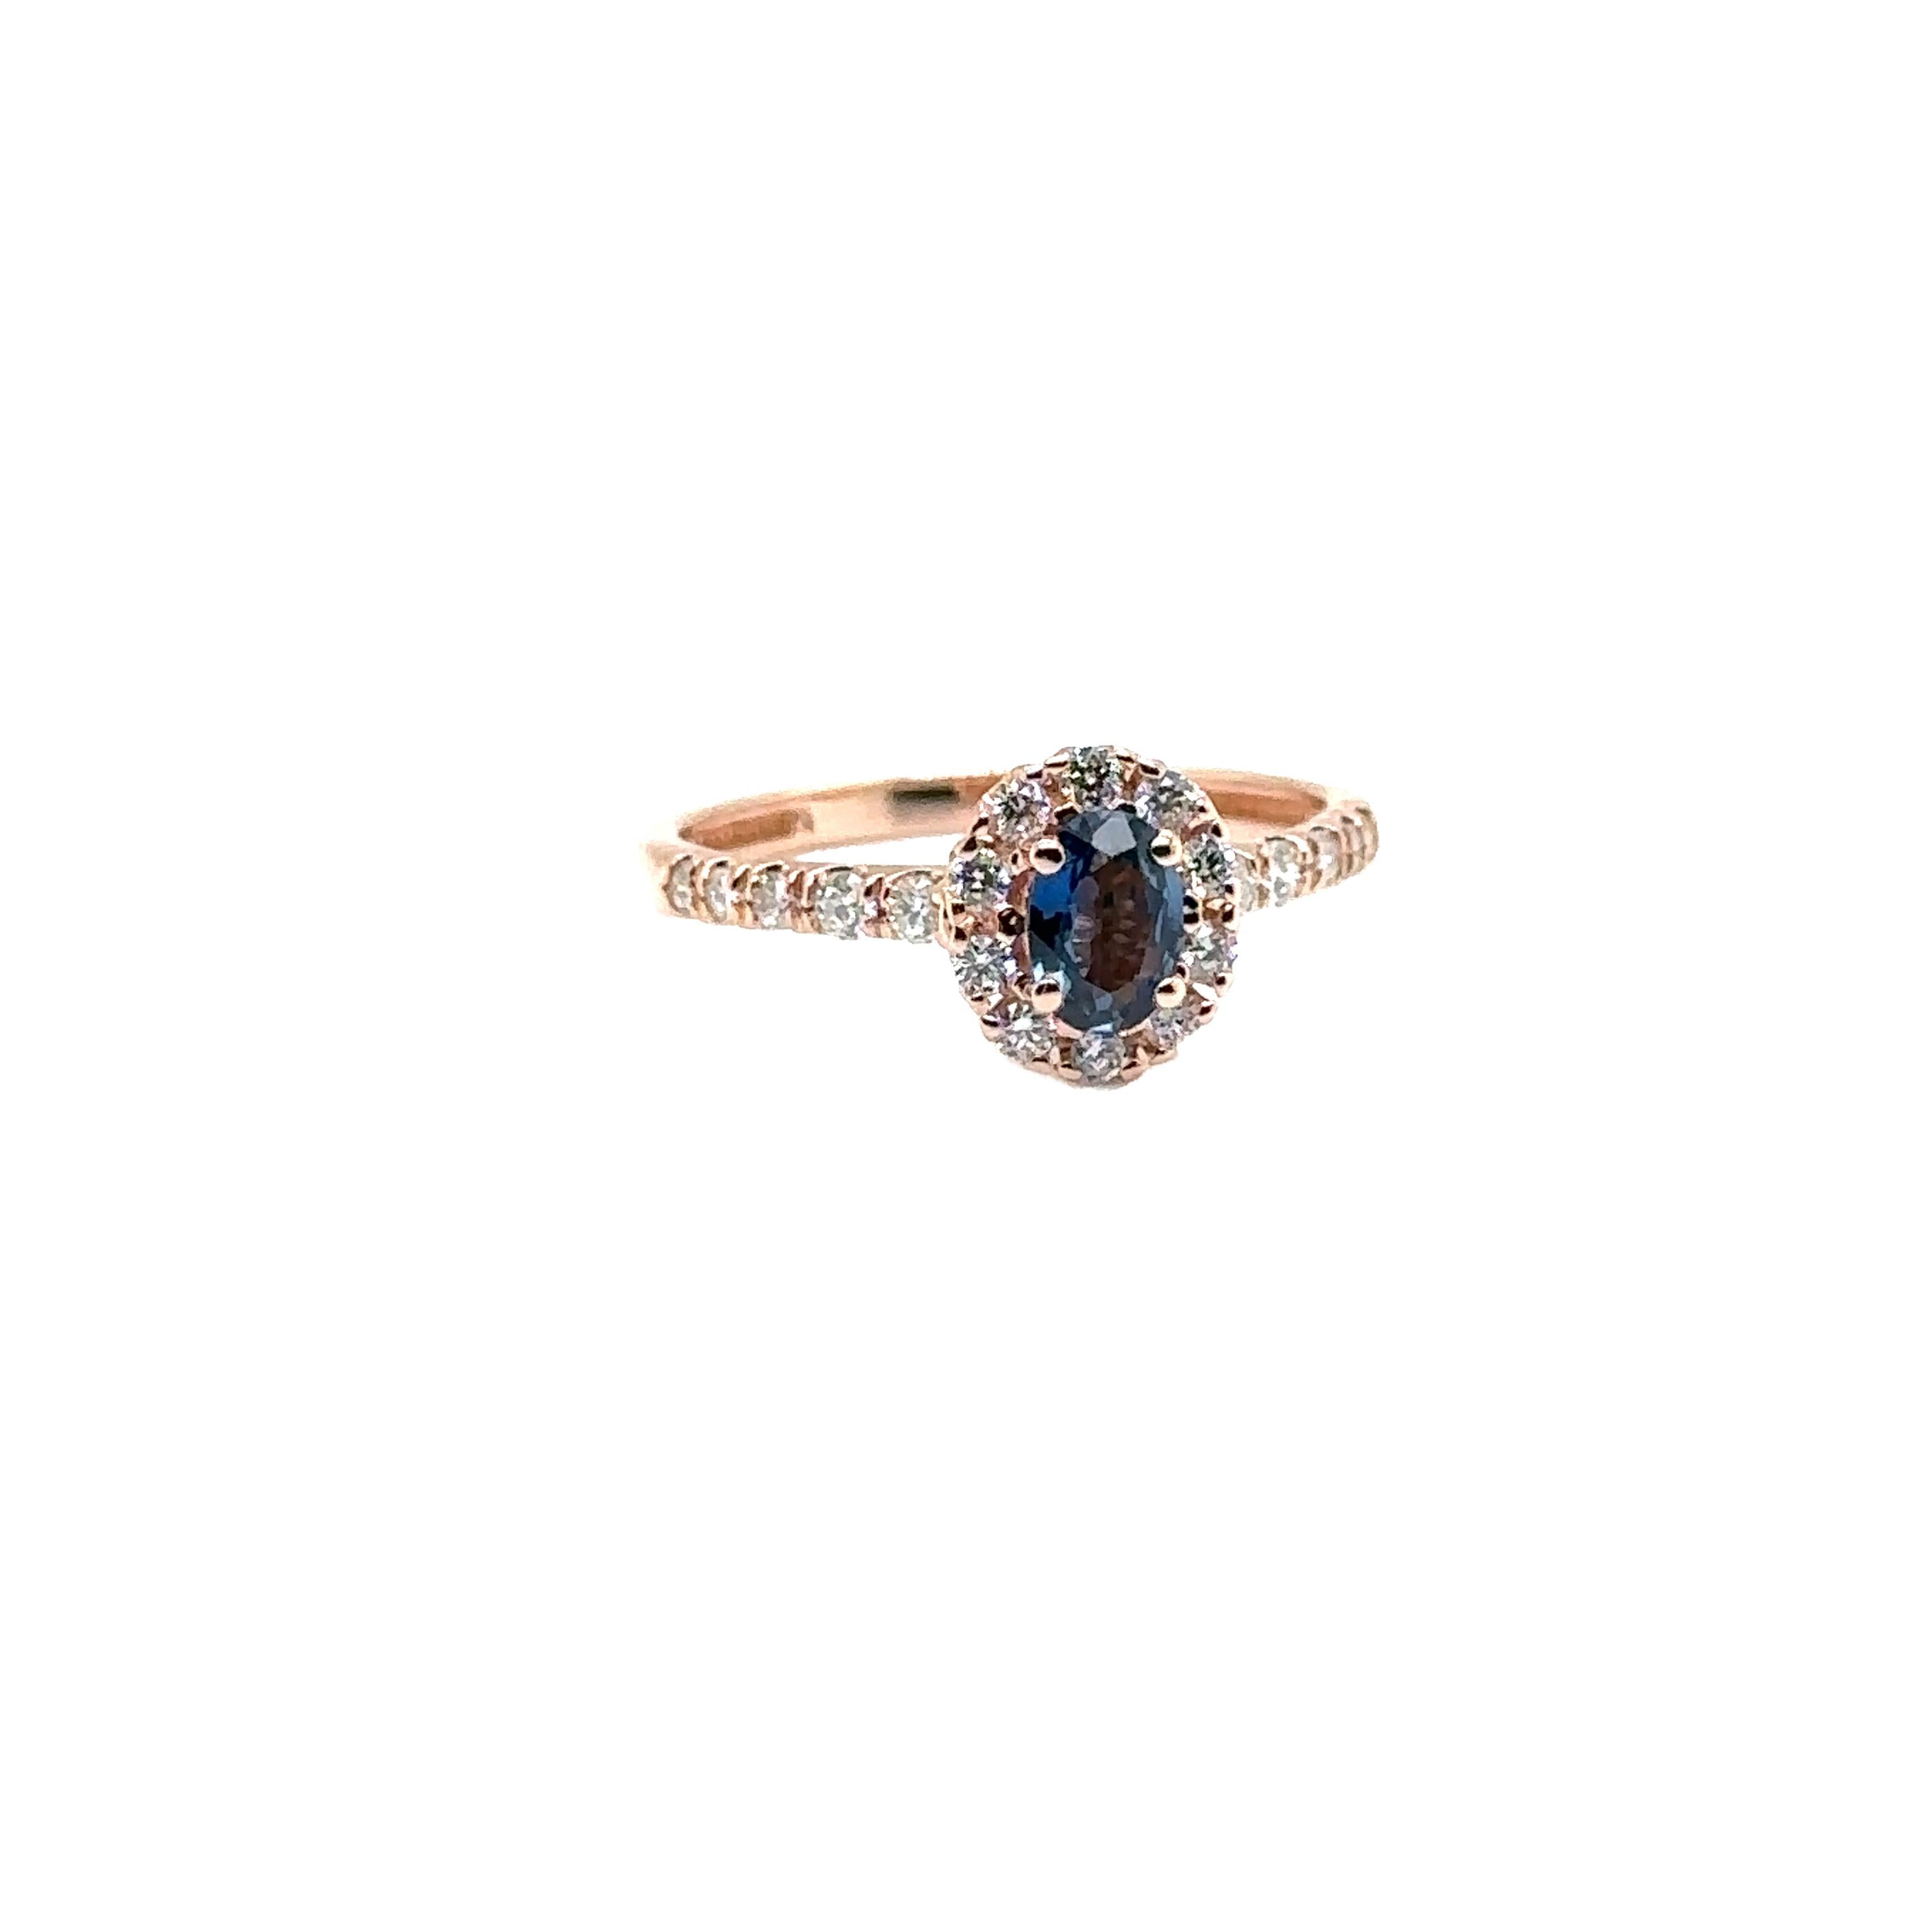 JAS-21-2235 - 14K ROSE GOLD OVAL SAPPHIRE RING with DIAMONDS For Sale 4